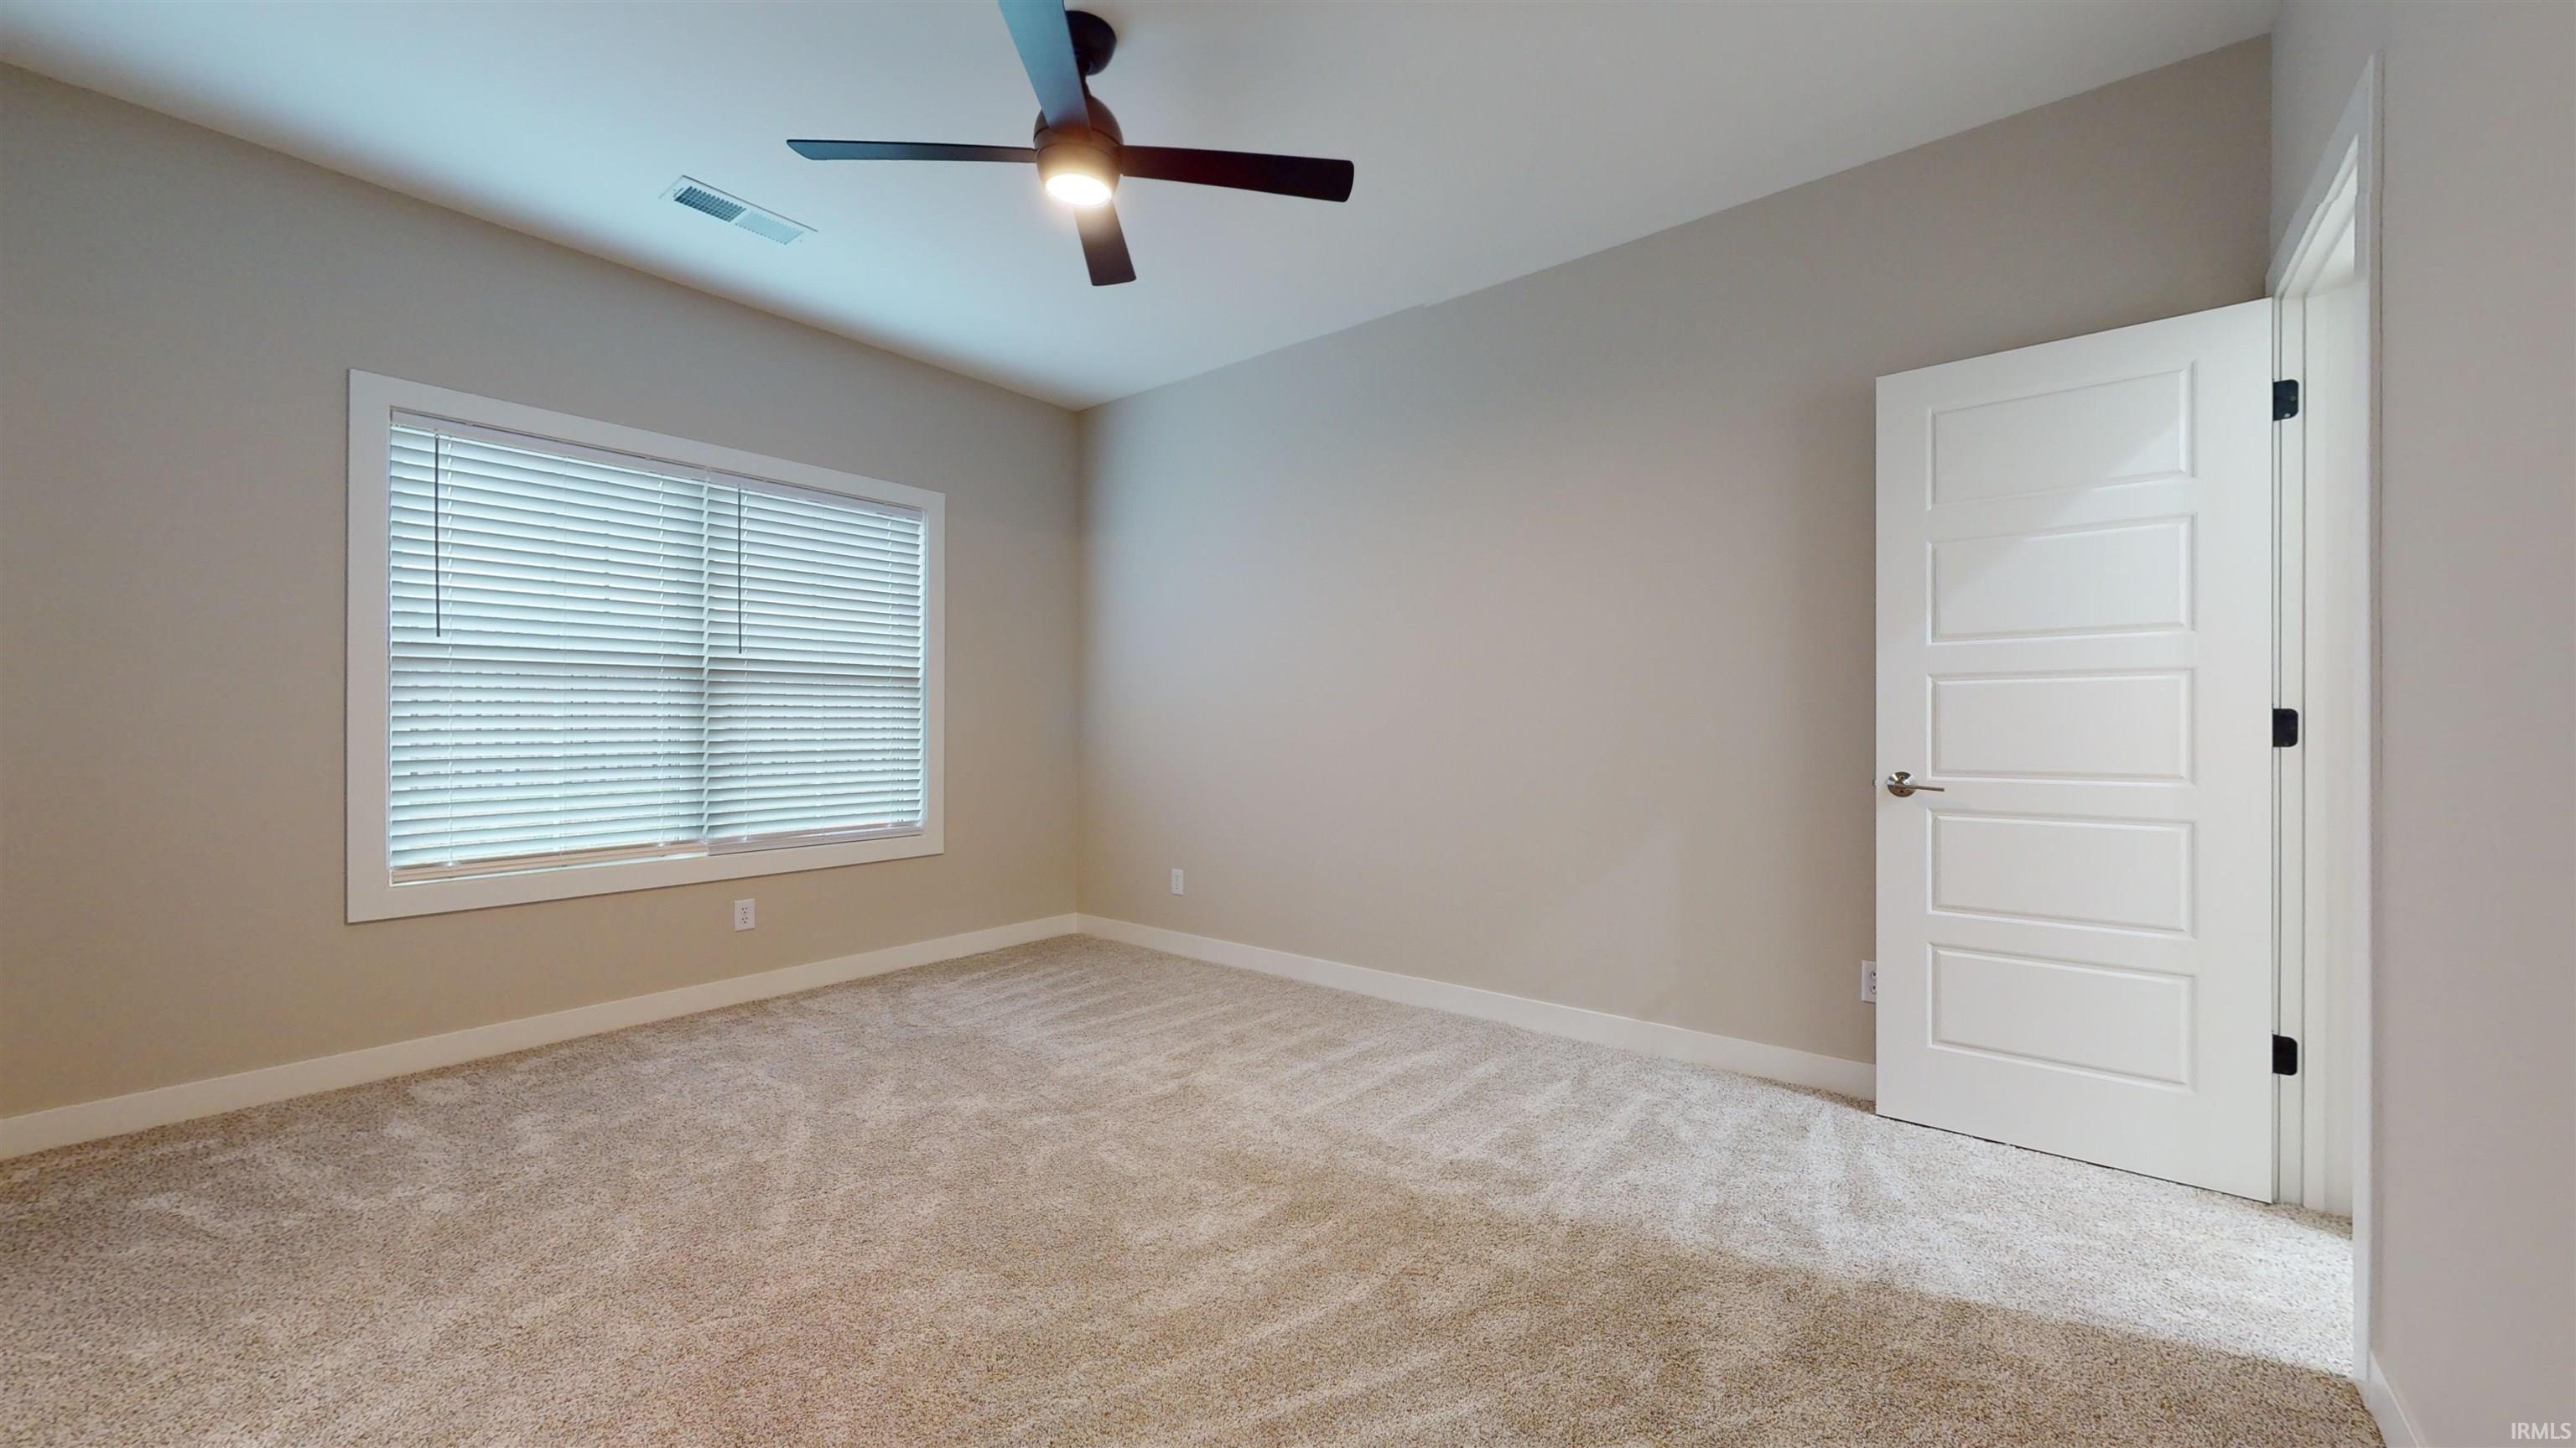 Located off of the great room and features a walk-in-closet, and a private bathroom.